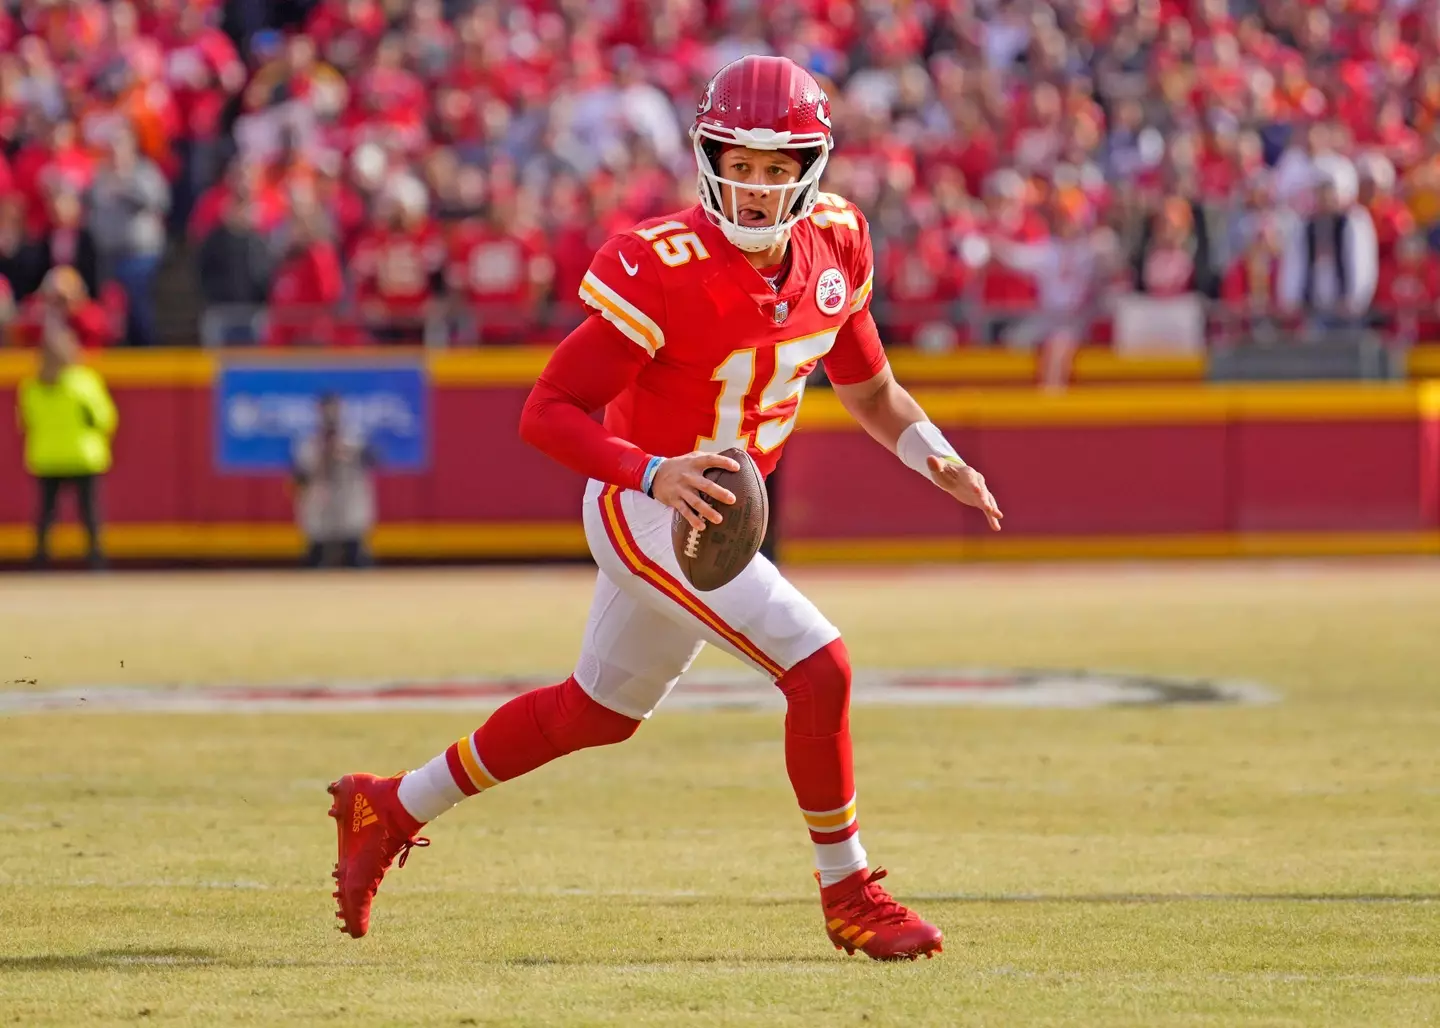 Mahomes is nursing an injury but will hope to win a second Super Bowl title.